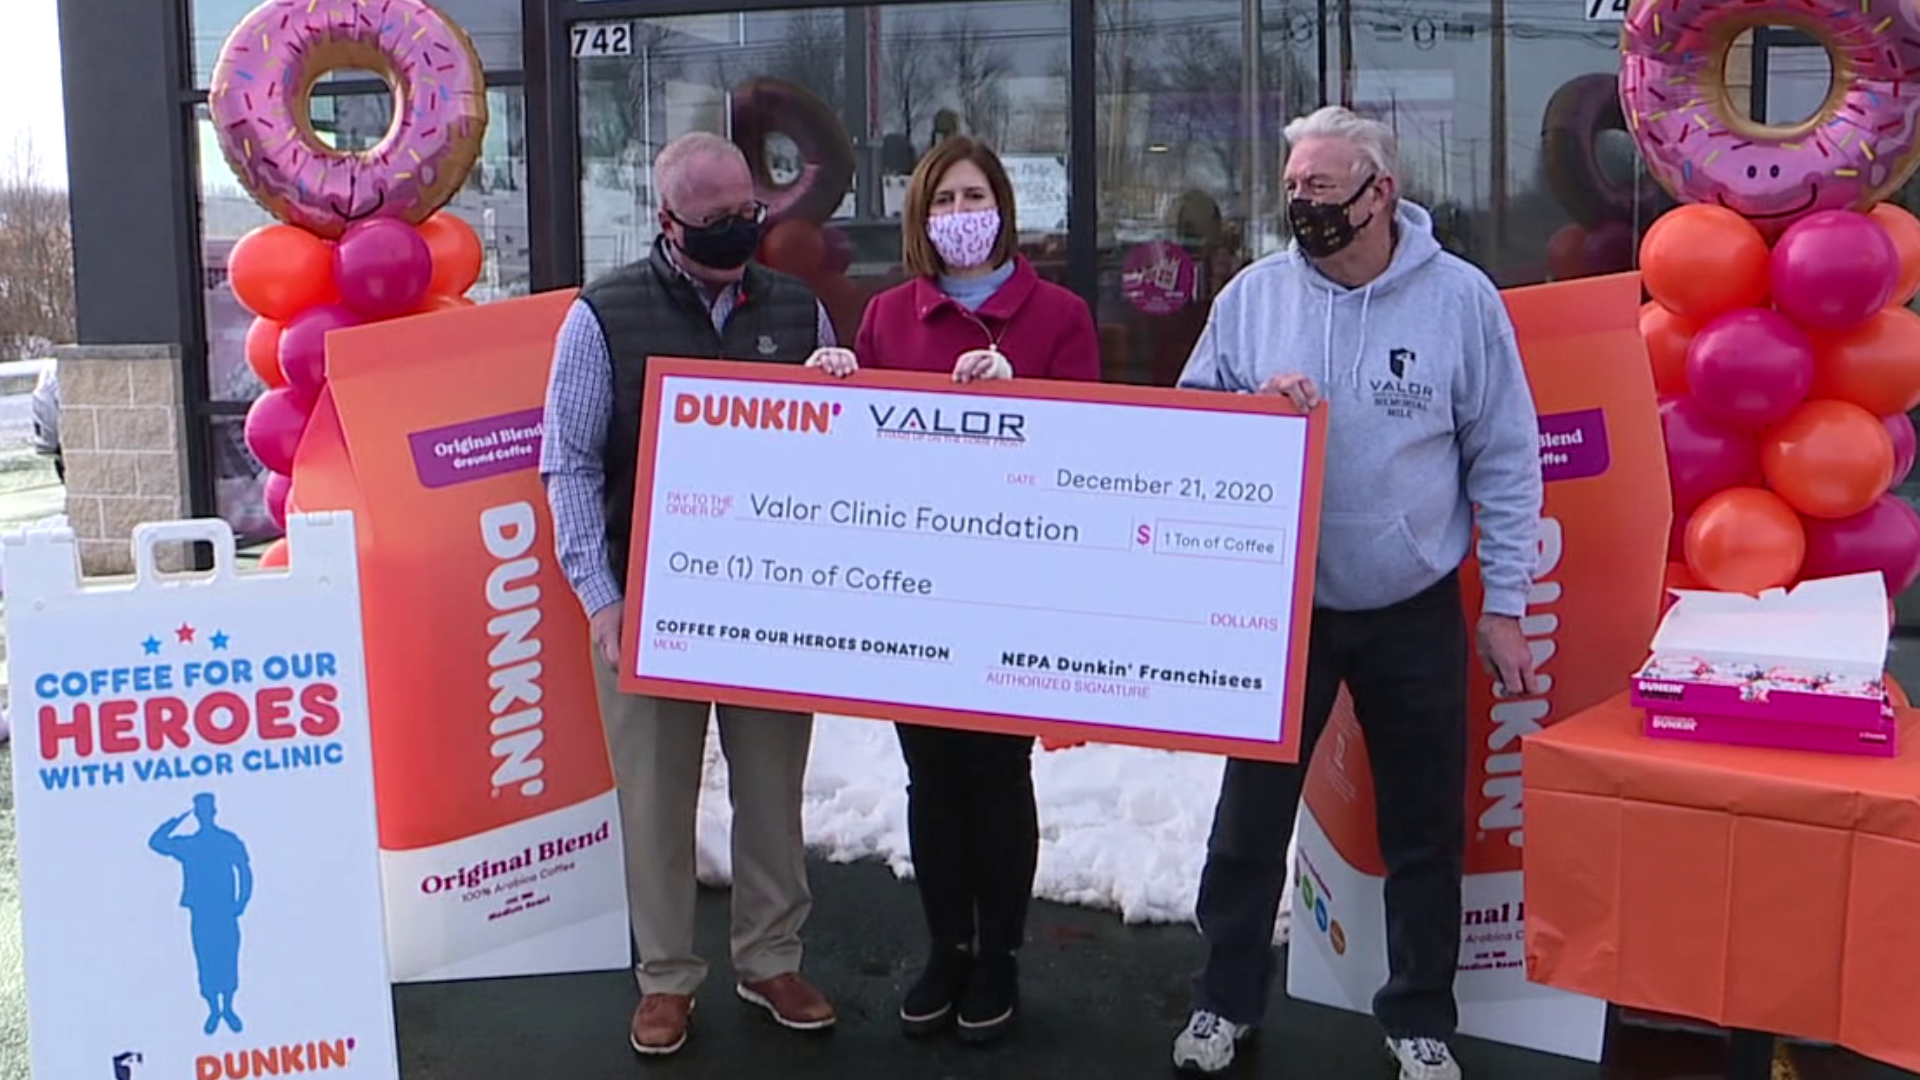 The Dunkin' on Davis Street donated one ton of coffee to the VALOR Clinic Foundation Monday morning.